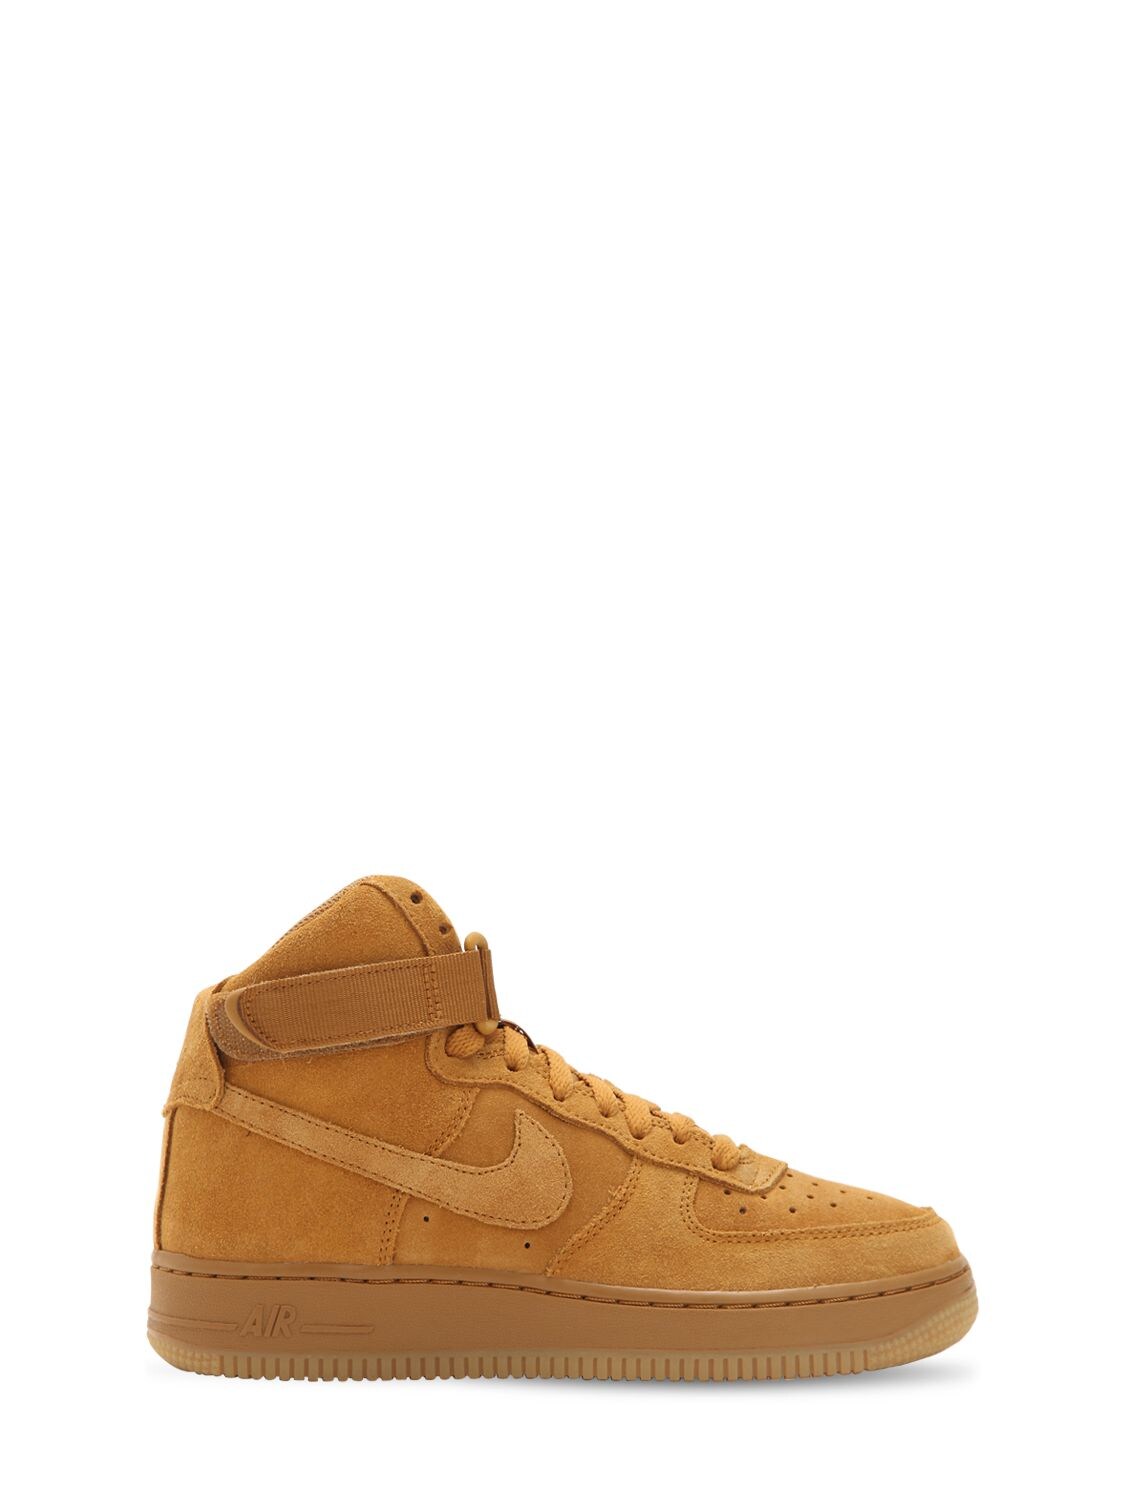 suede air force 1 high top